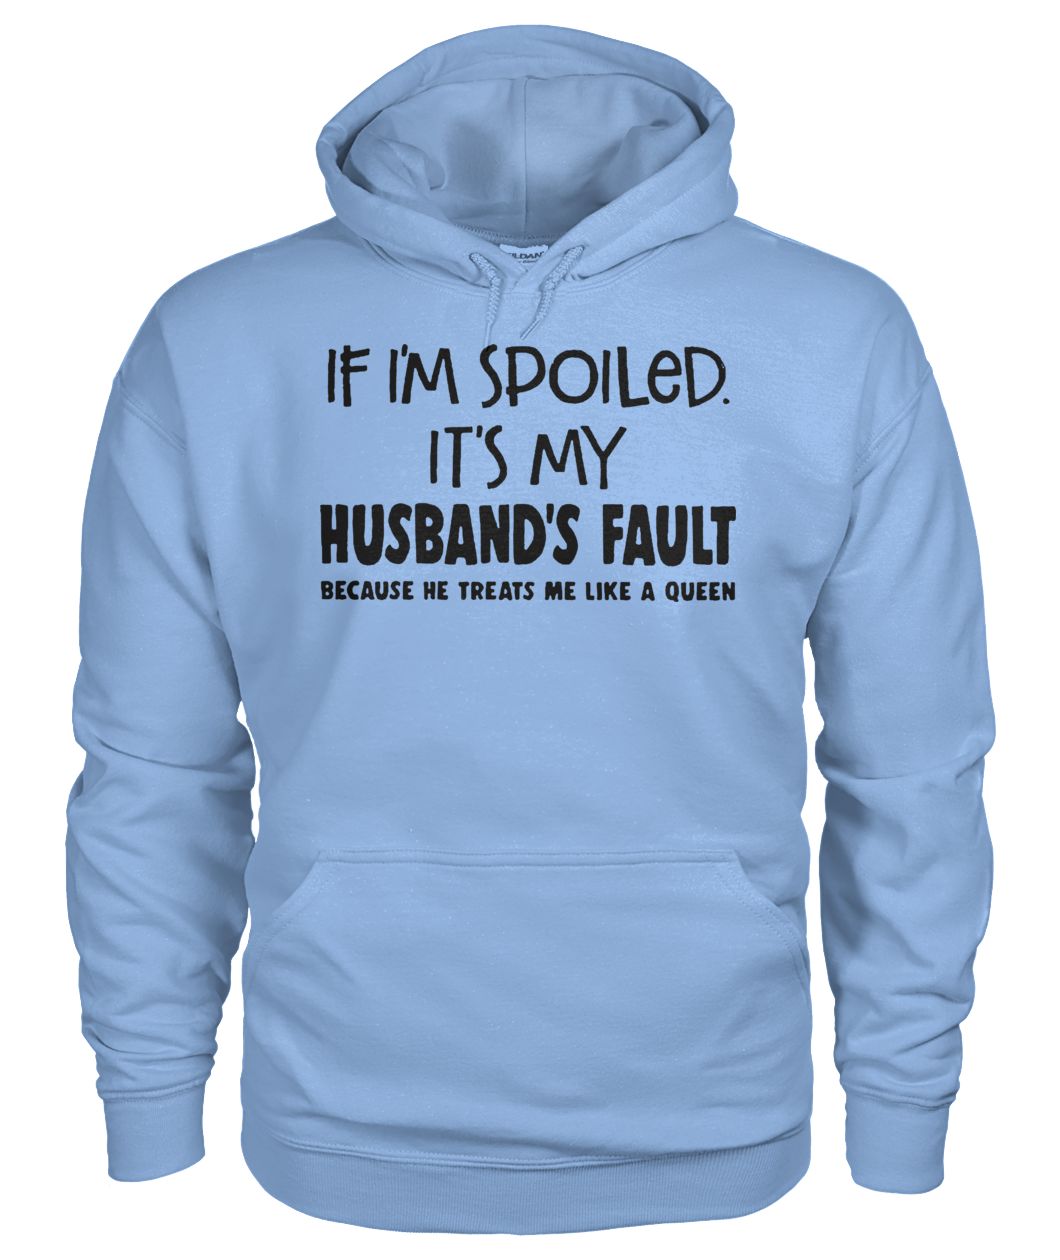 If I'm spoiled it's my husband's fault because he treats me like a queen gildan hoodie